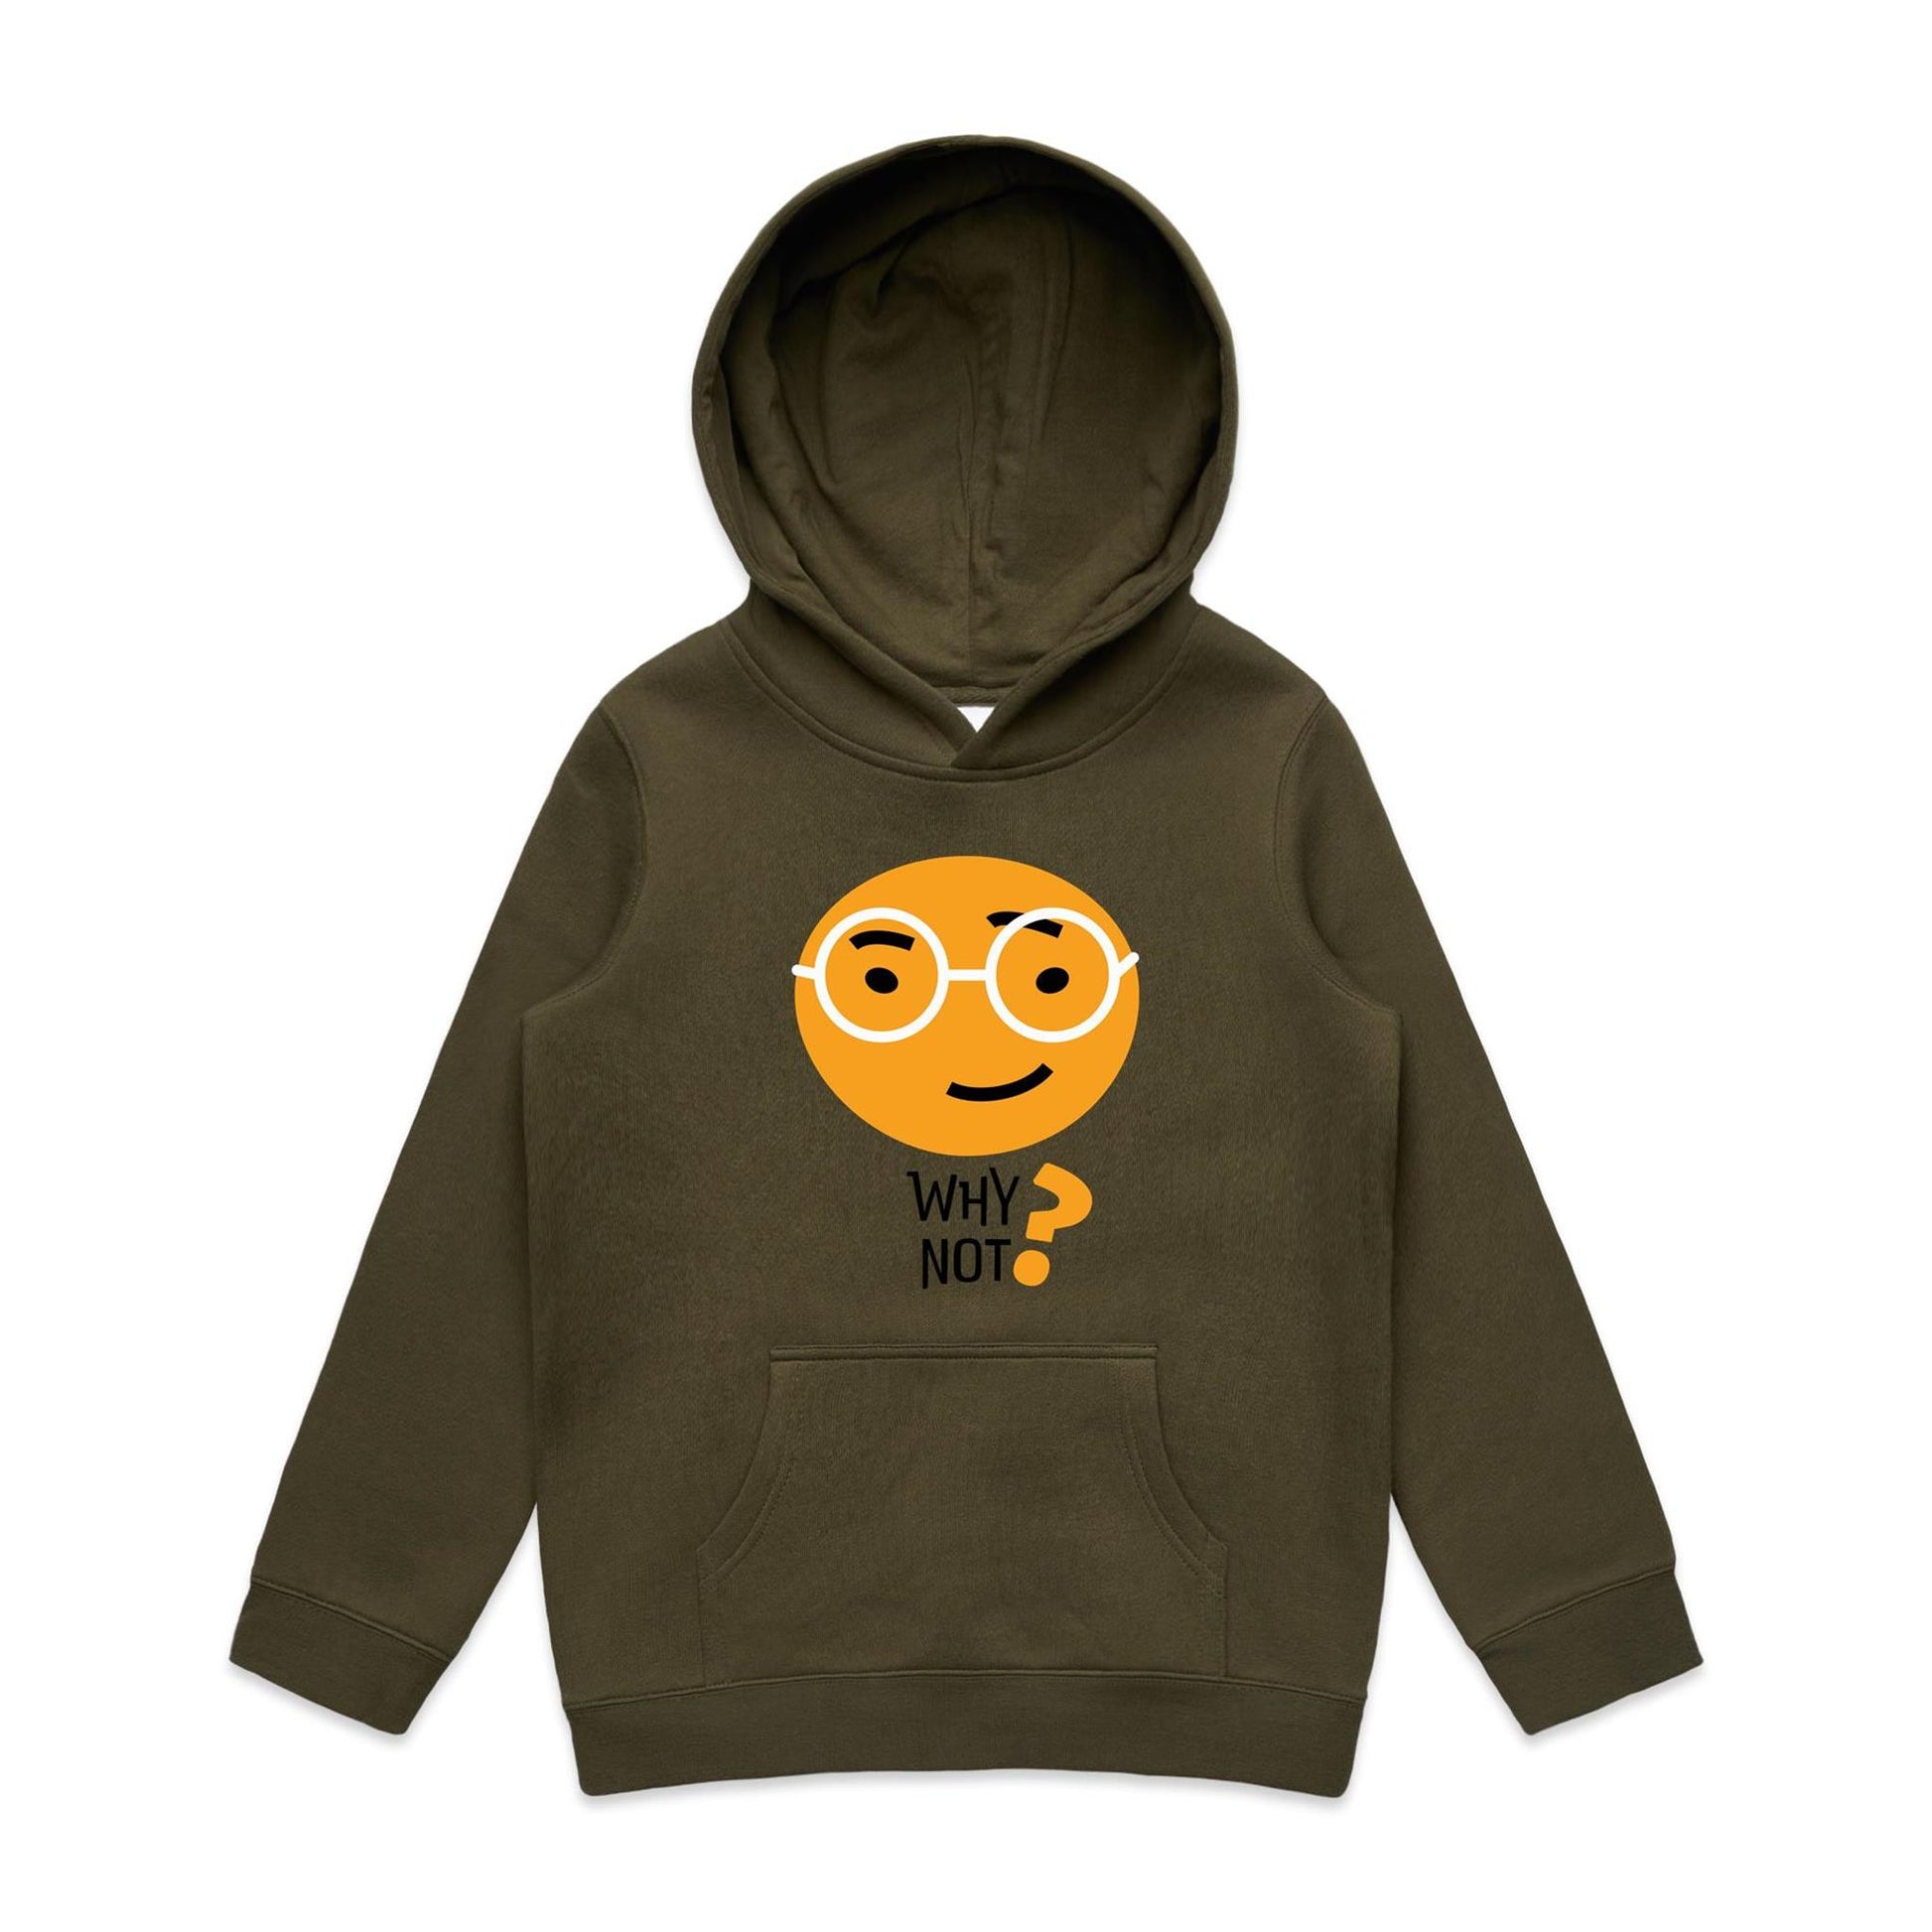 Why Not? - Youth Supply Hood Army Kids Hoodie